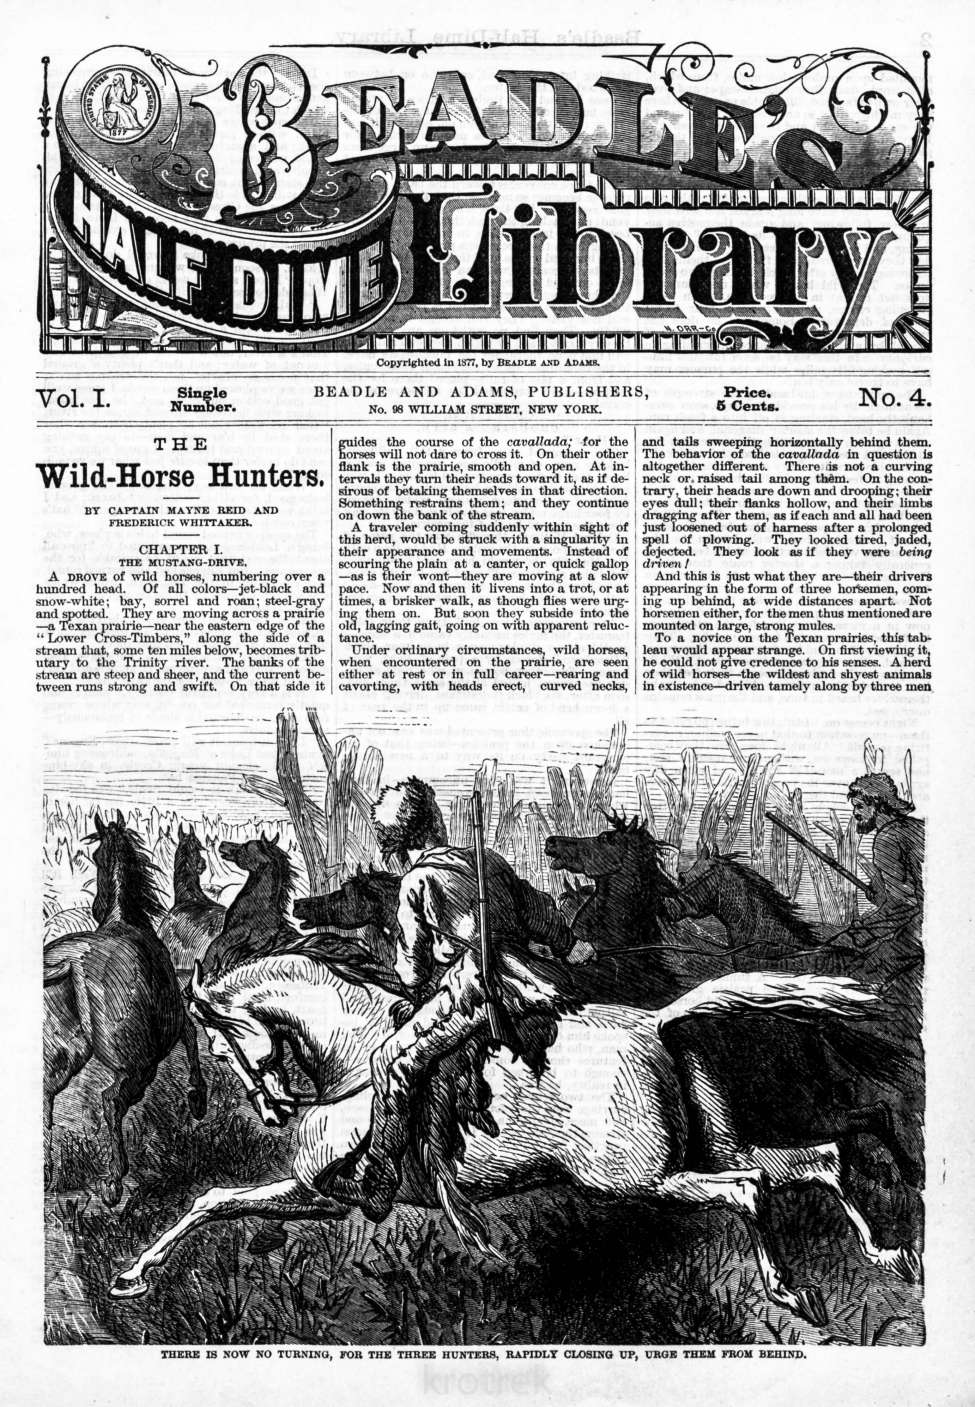 Book Cover For Beadle's Half Dime Library 4 - The Wild-Horse Hunters